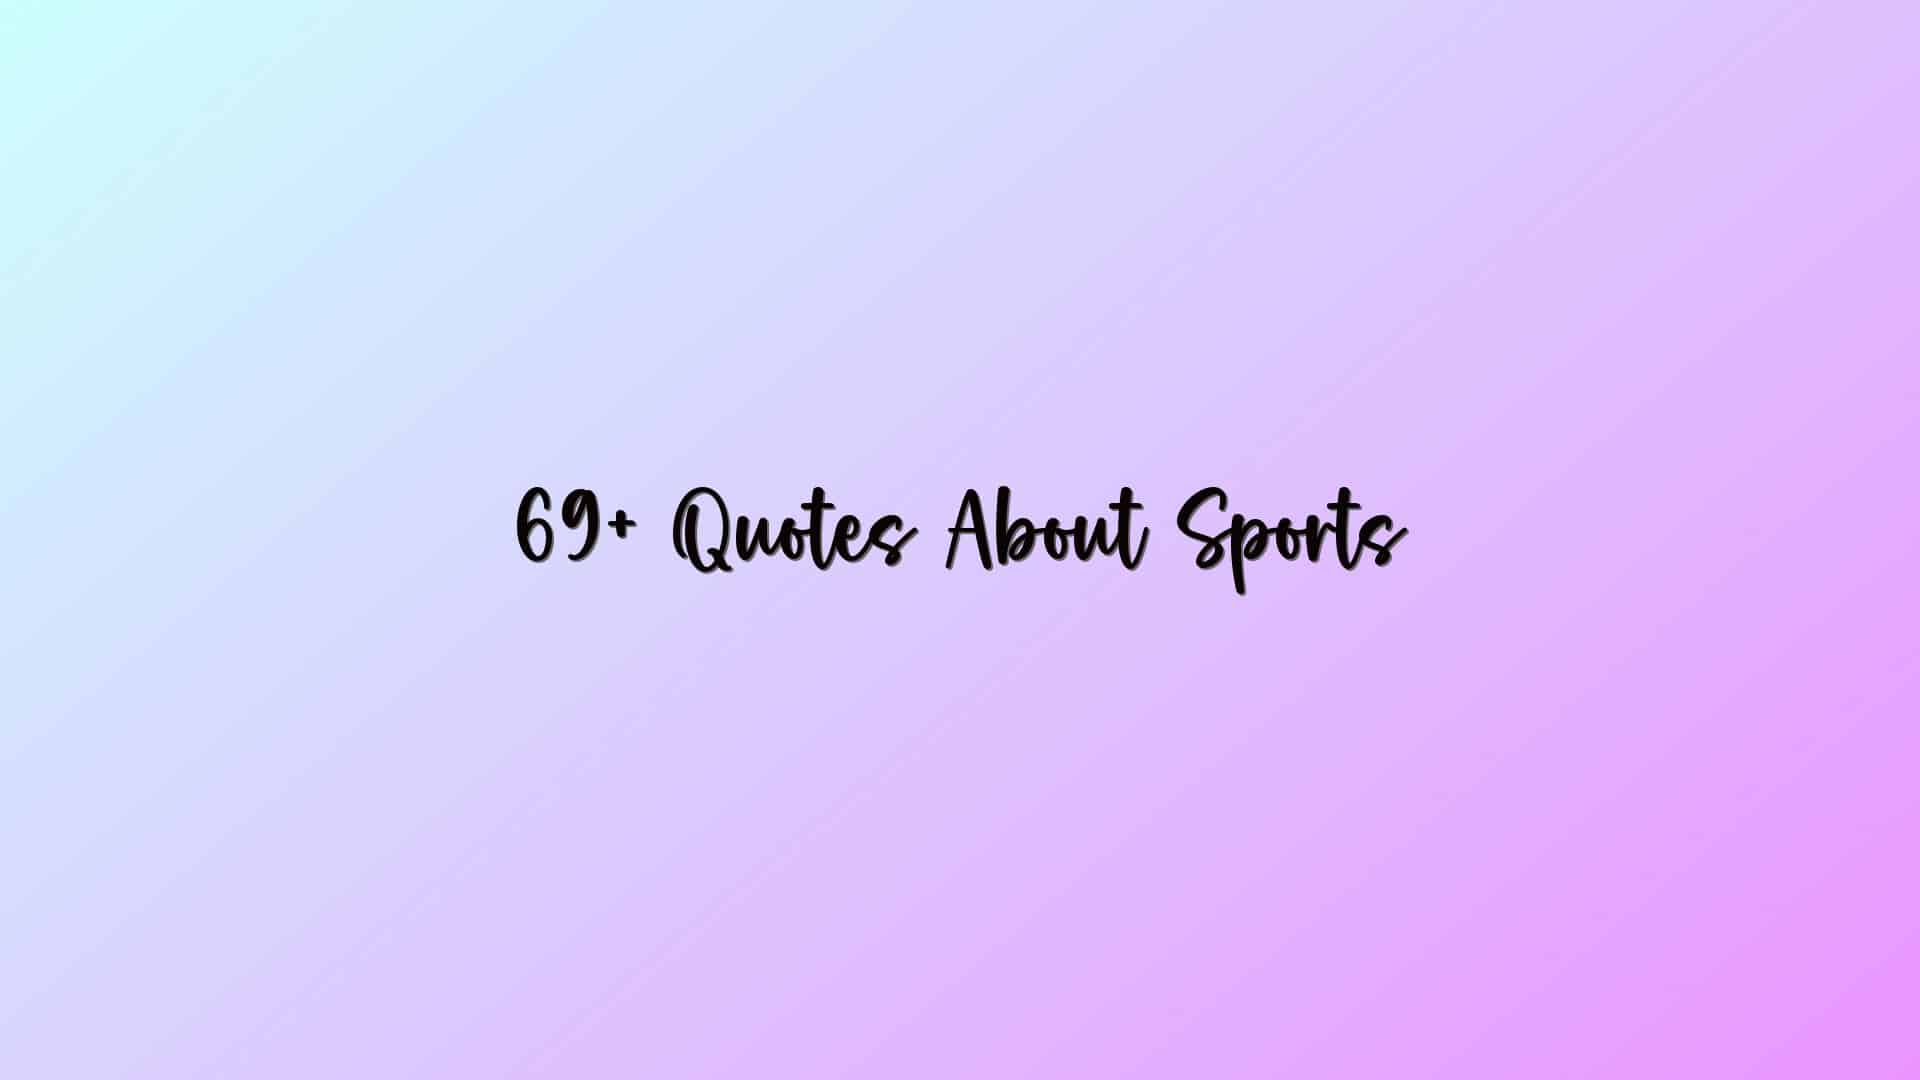 69+ Quotes About Sports